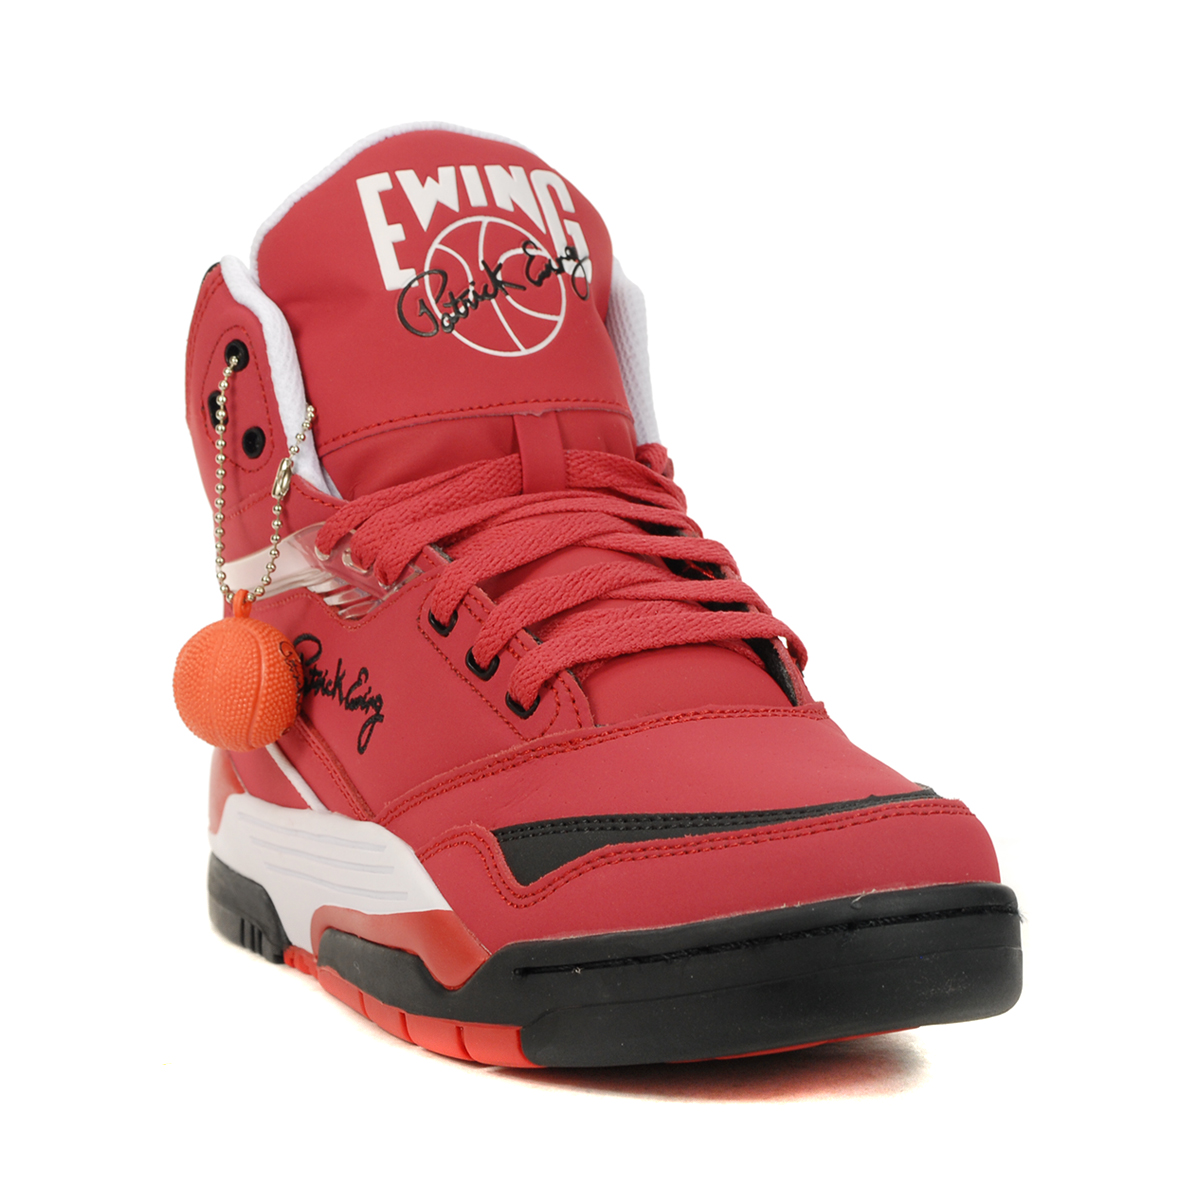 Ewing Athletics Center Red/Black/White Patrick Ewing Basketball Shoes ...